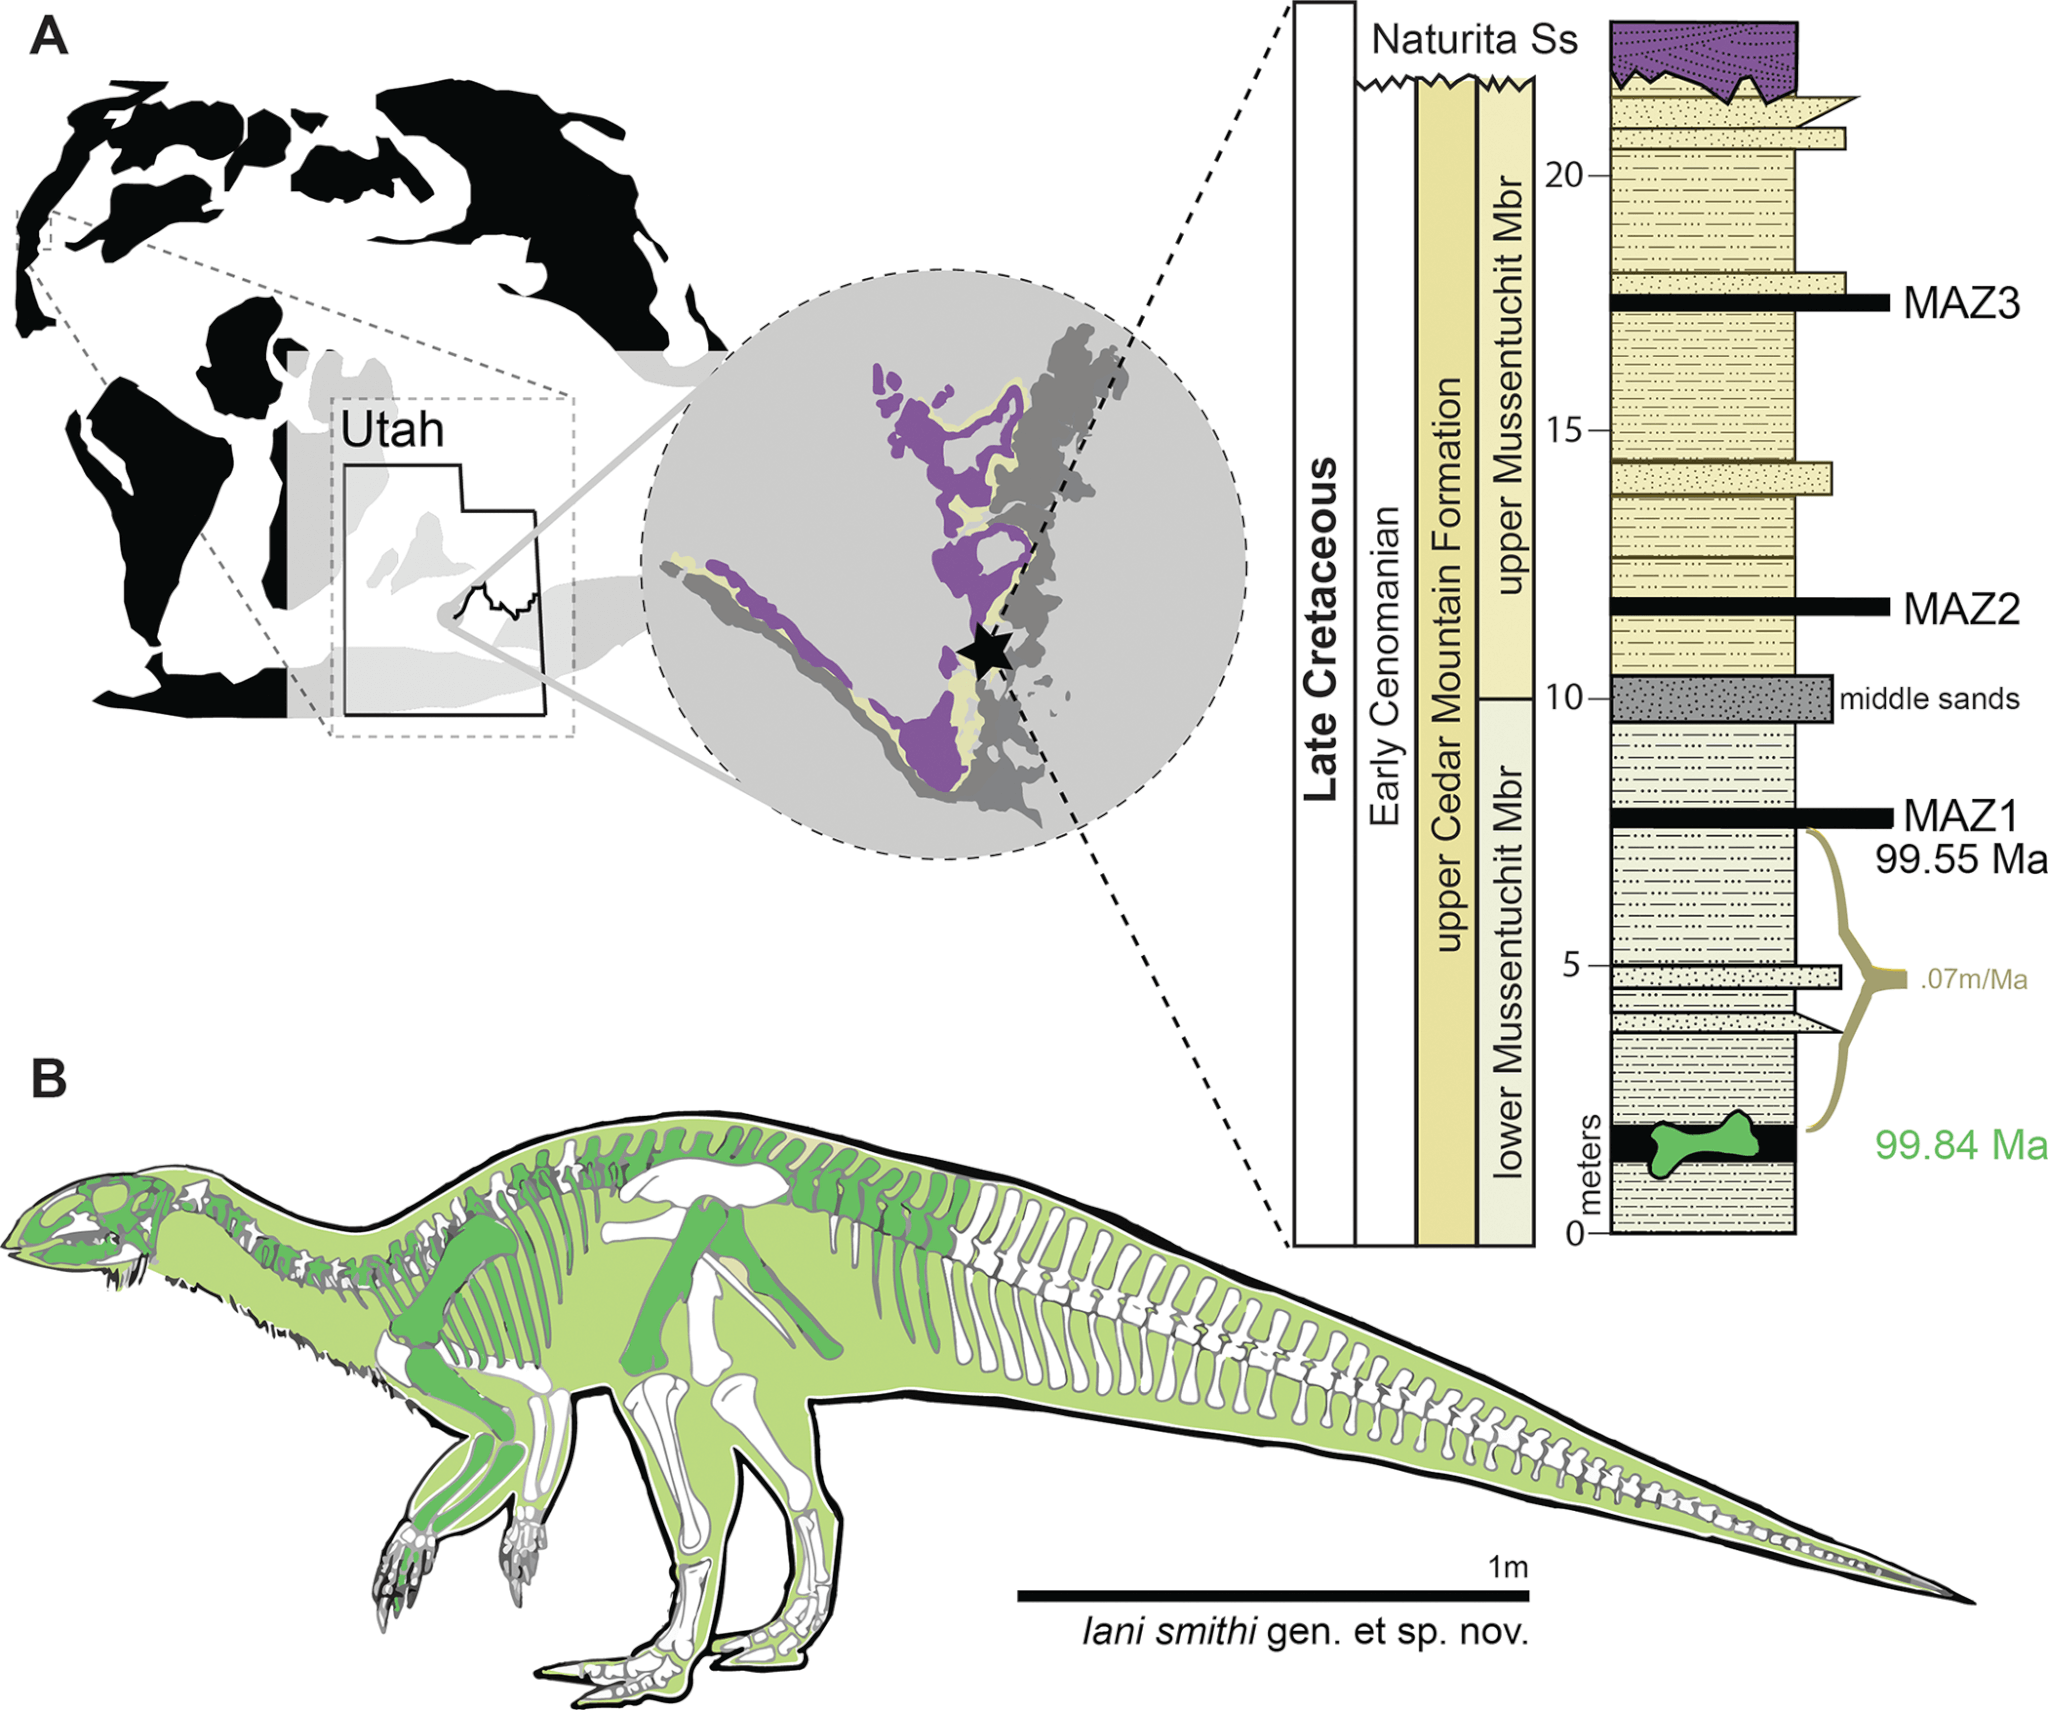 figure of green, newly discovered dinosaur and partial US map showing the state of Utah and a stratigraphic section at the quarry with dated ash horizons